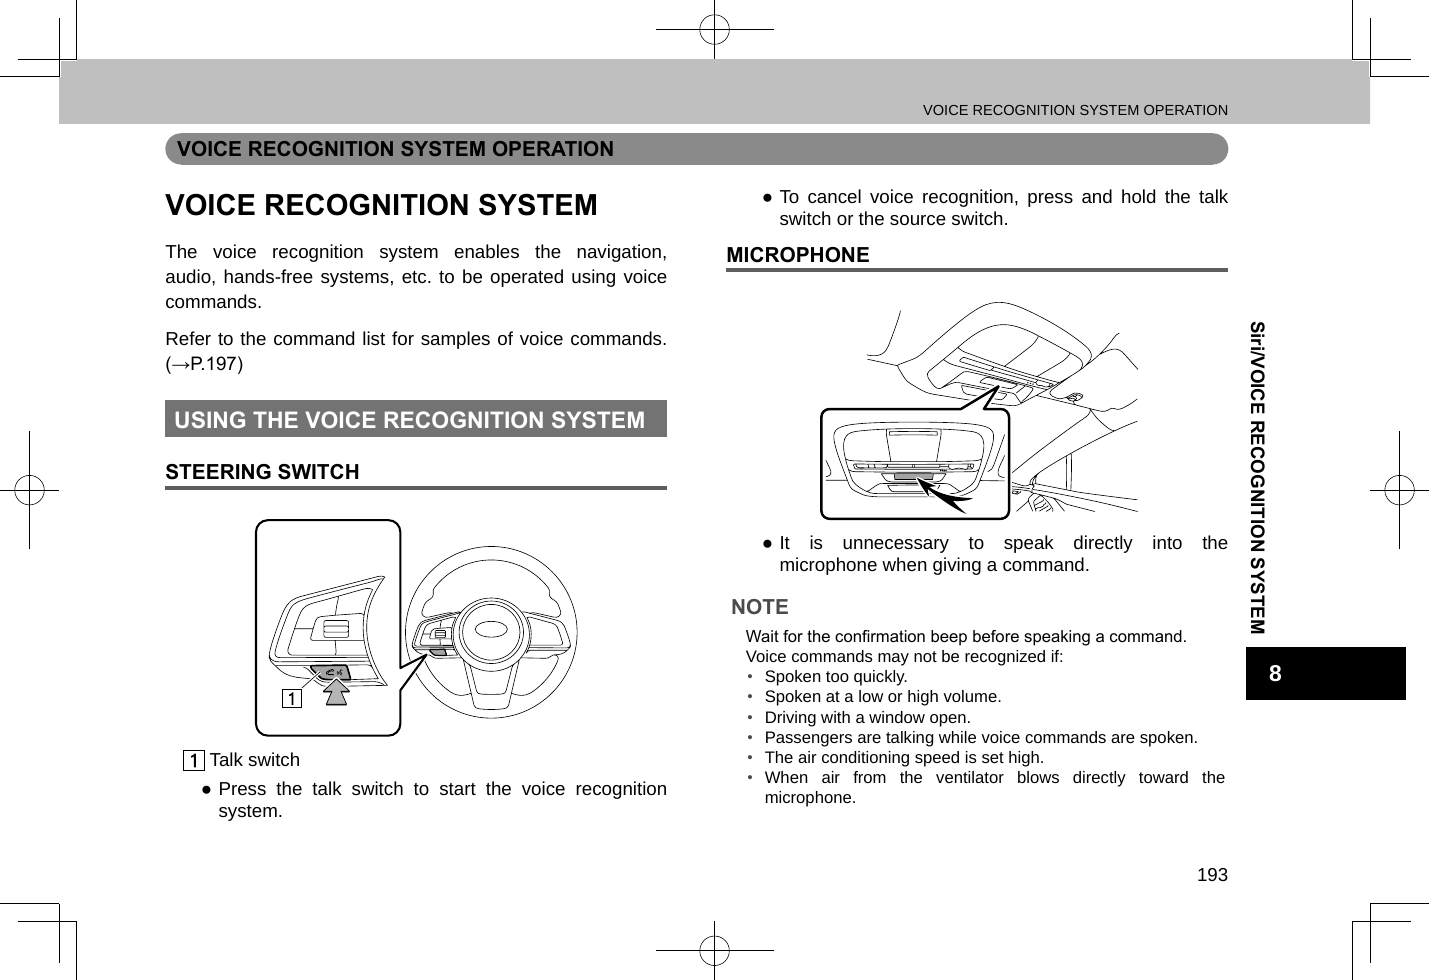 VOICE RECOGNITION SYSTEM OPERATION193Siri/VOICE RECOGNITION SYSTEM8VOICE RECOGNITION SYSTEM OPERATIONVOICE RECOGNITION SYSTEMThe voice recognition system enables the navigation, audio, hands-free systems, etc. to be operated using voice commands.Refer to the command list for samples of voice commands. (→P.197)USING THE VOICE RECOGNITION SYSTEMSTEERING SWITCH Talk switch ●Press the talk switch to start the voice recognition system. ●To cancel voice recognition, press and hold the talk switch or the source switch.MICROPHONE ●It is unnecessary to speak directly into the microphone when giving a command.NOTE lWait for the conrmation beep before speaking a command. lVoice commands may not be recognized if:•  Spoken too quickly.•  Spoken at a low or high volume.•  Driving with a window open.•  Passengers are talking while voice commands are spoken.•  The air conditioning speed is set high.• When air from the ventilator blows directly toward the microphone.